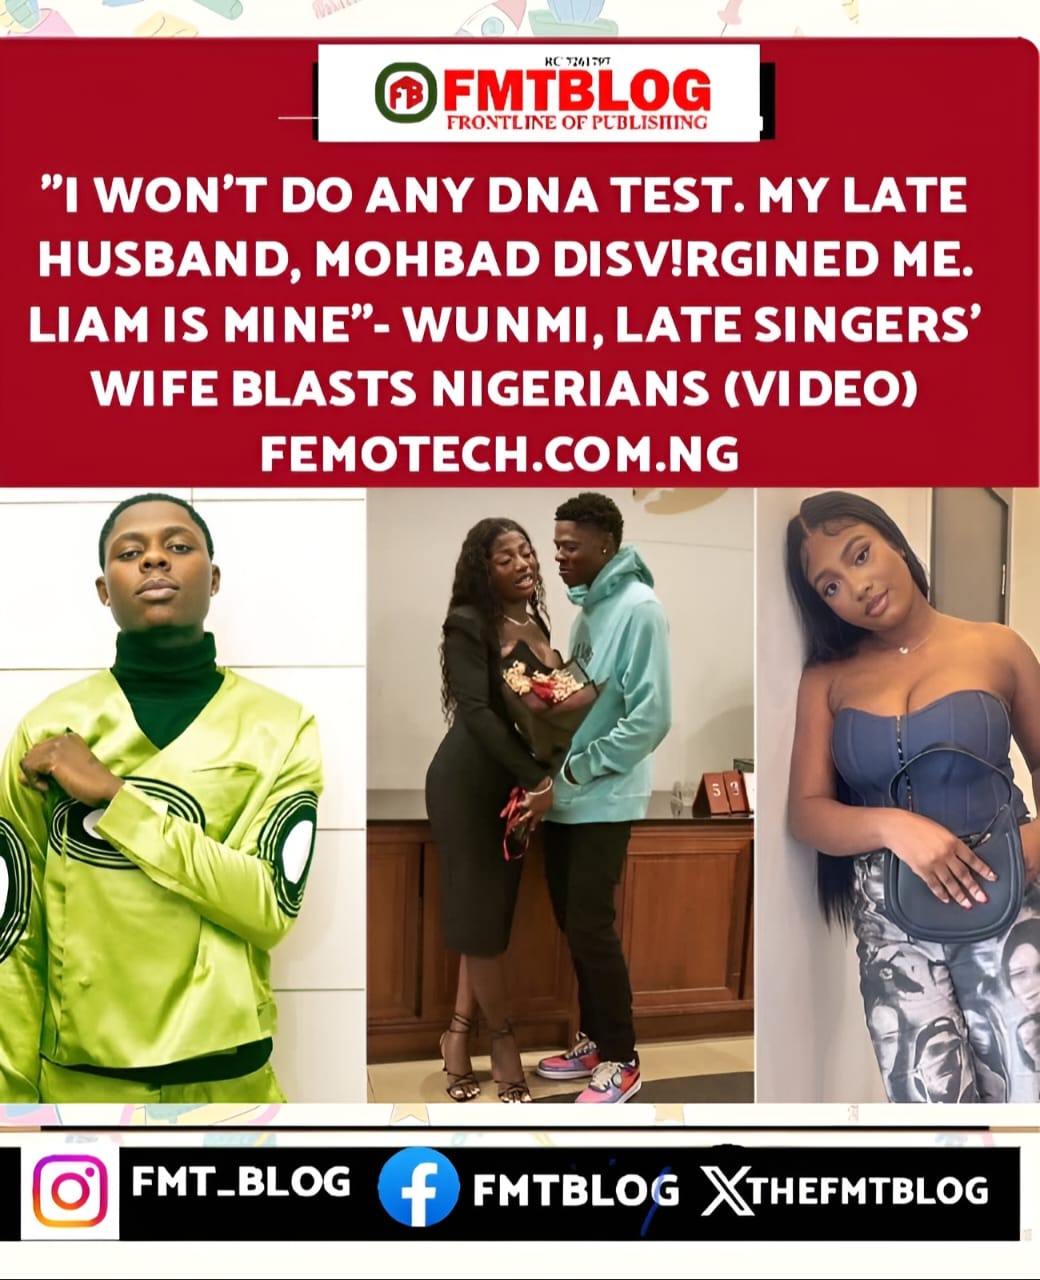 ”I Won’t Do Any DNA Test. My Late Husband, Mohbad, Disv!rgined Me. Liam Is Mine”- Wunmi, Late Singers’ Wife Blasts Nigerians (VIDEO)